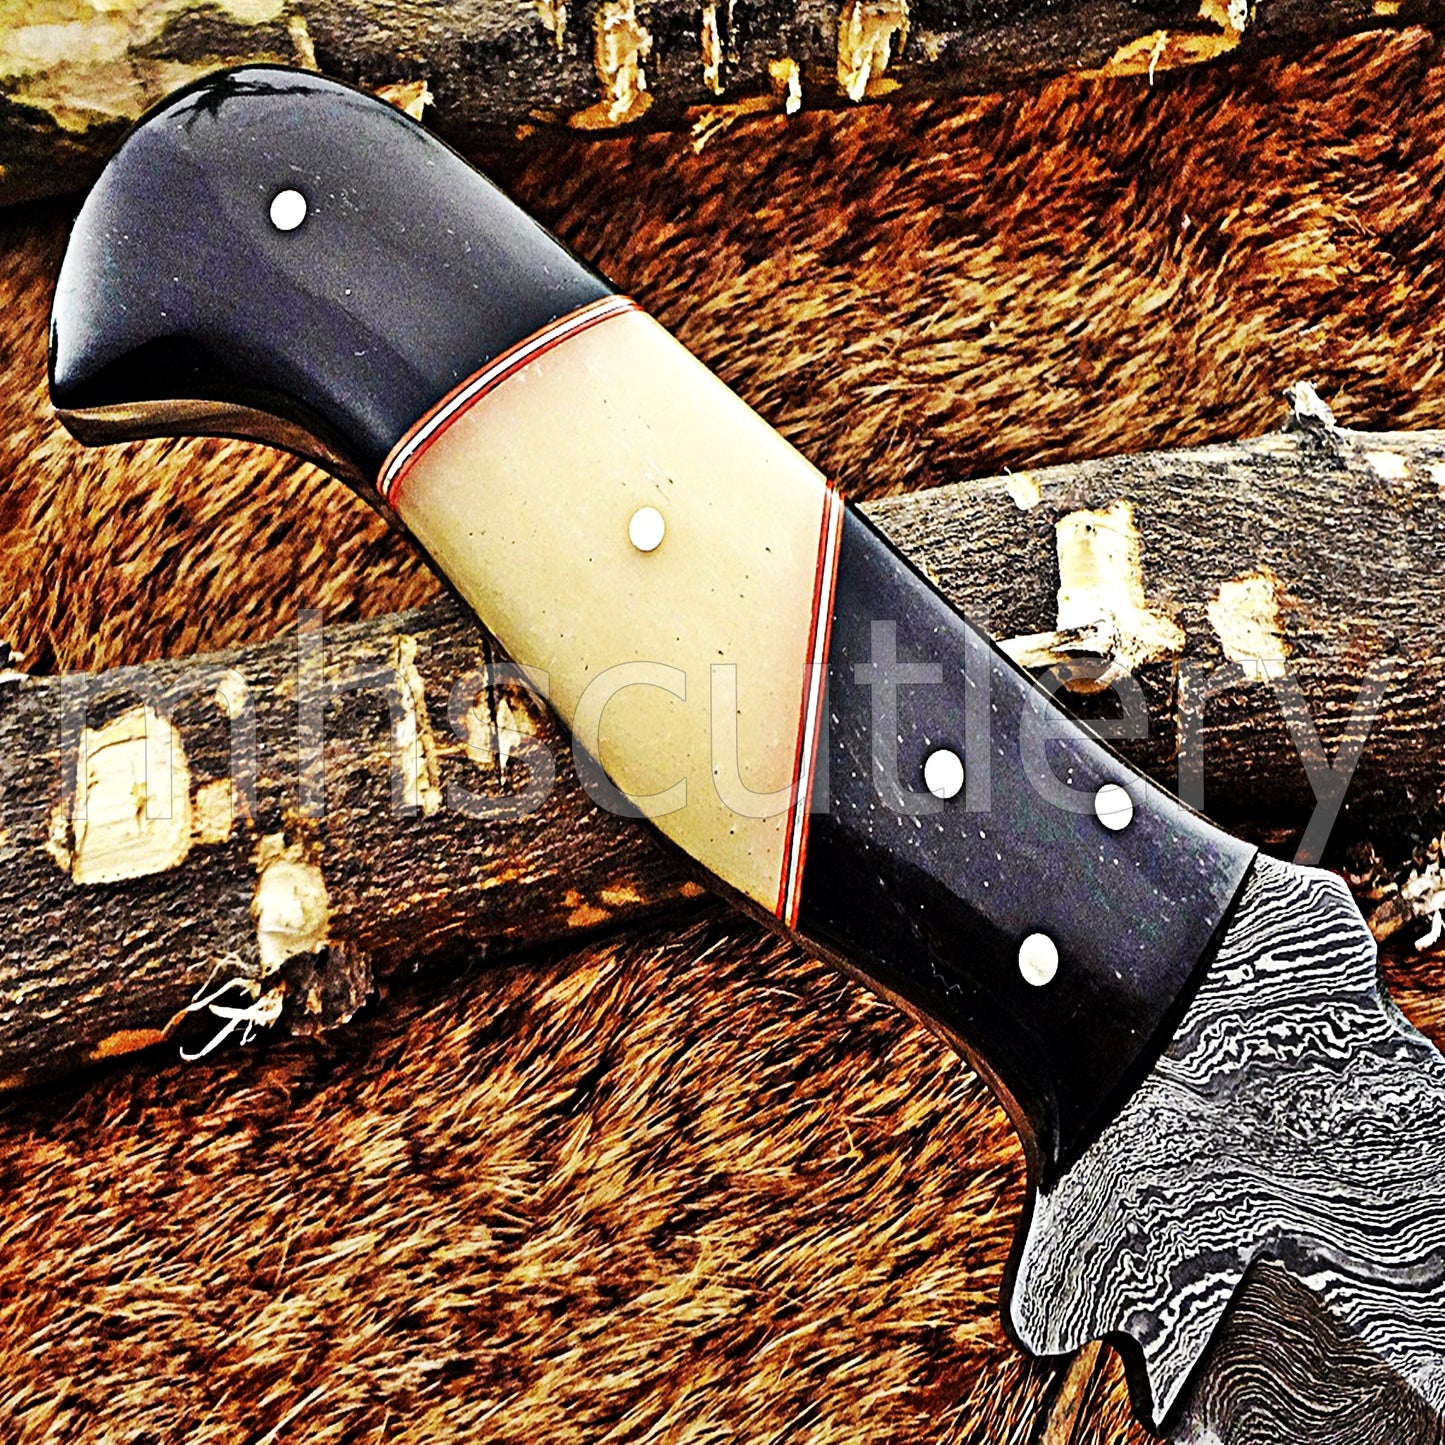 Hand Forged Damascus Steel Tanto Skinner Hunting Knife | mhscutlery